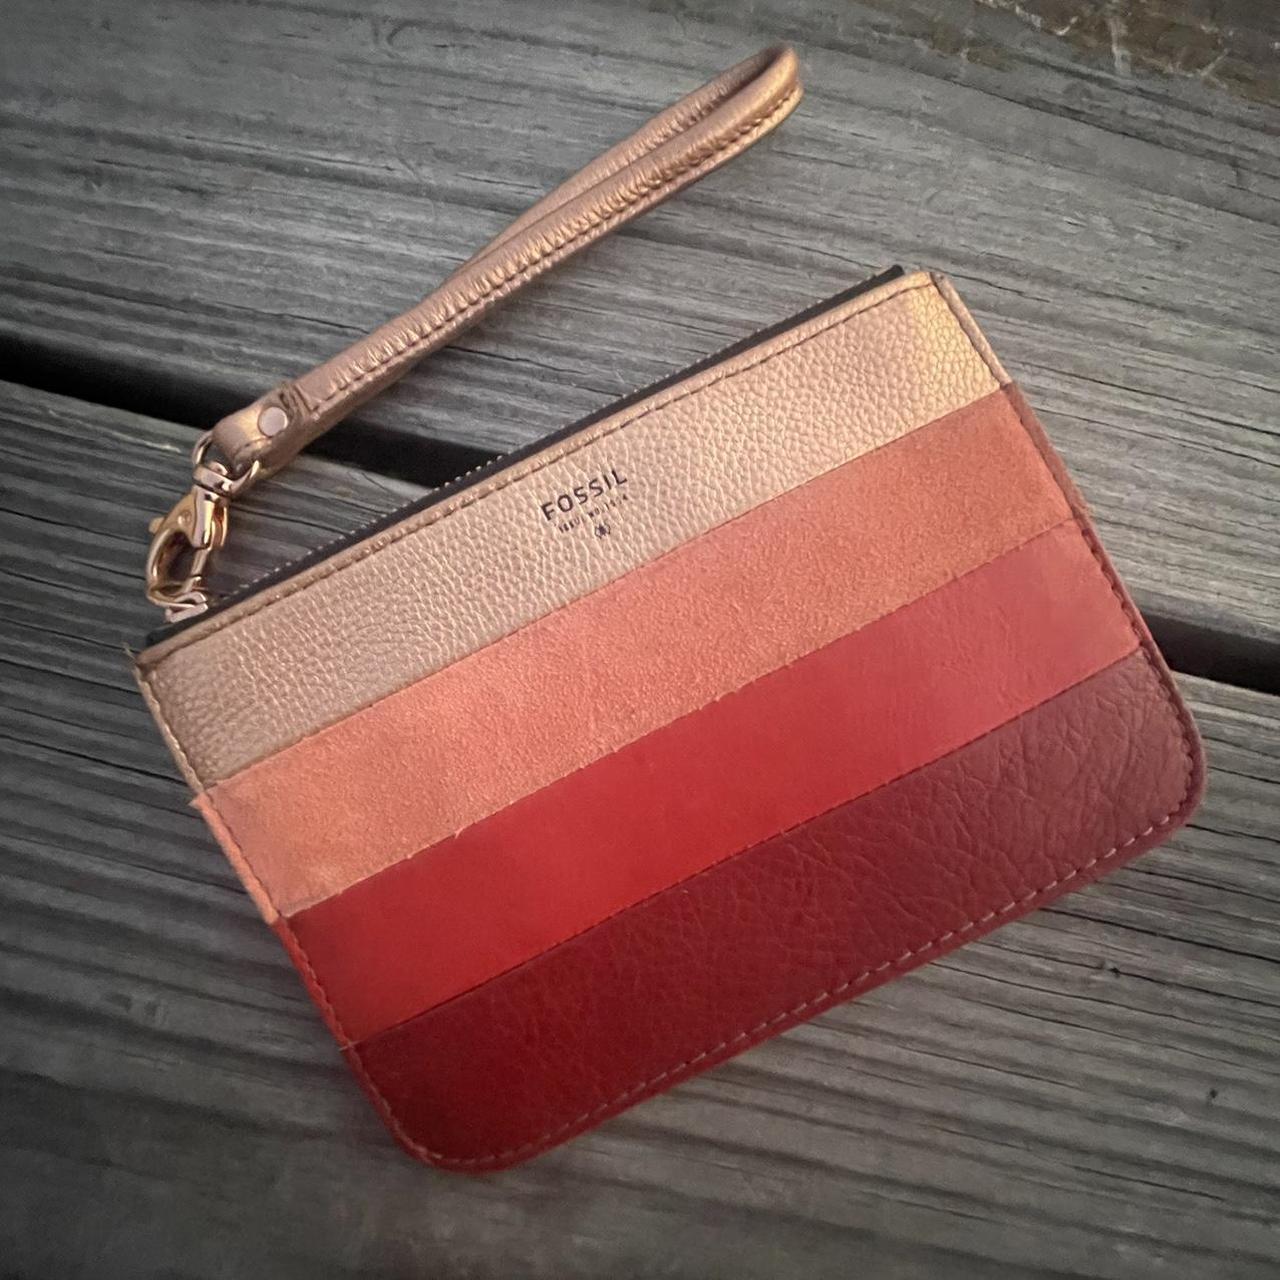 Clarks Red Leather Built-in Wallet Crossbody Bag Purse (8x7